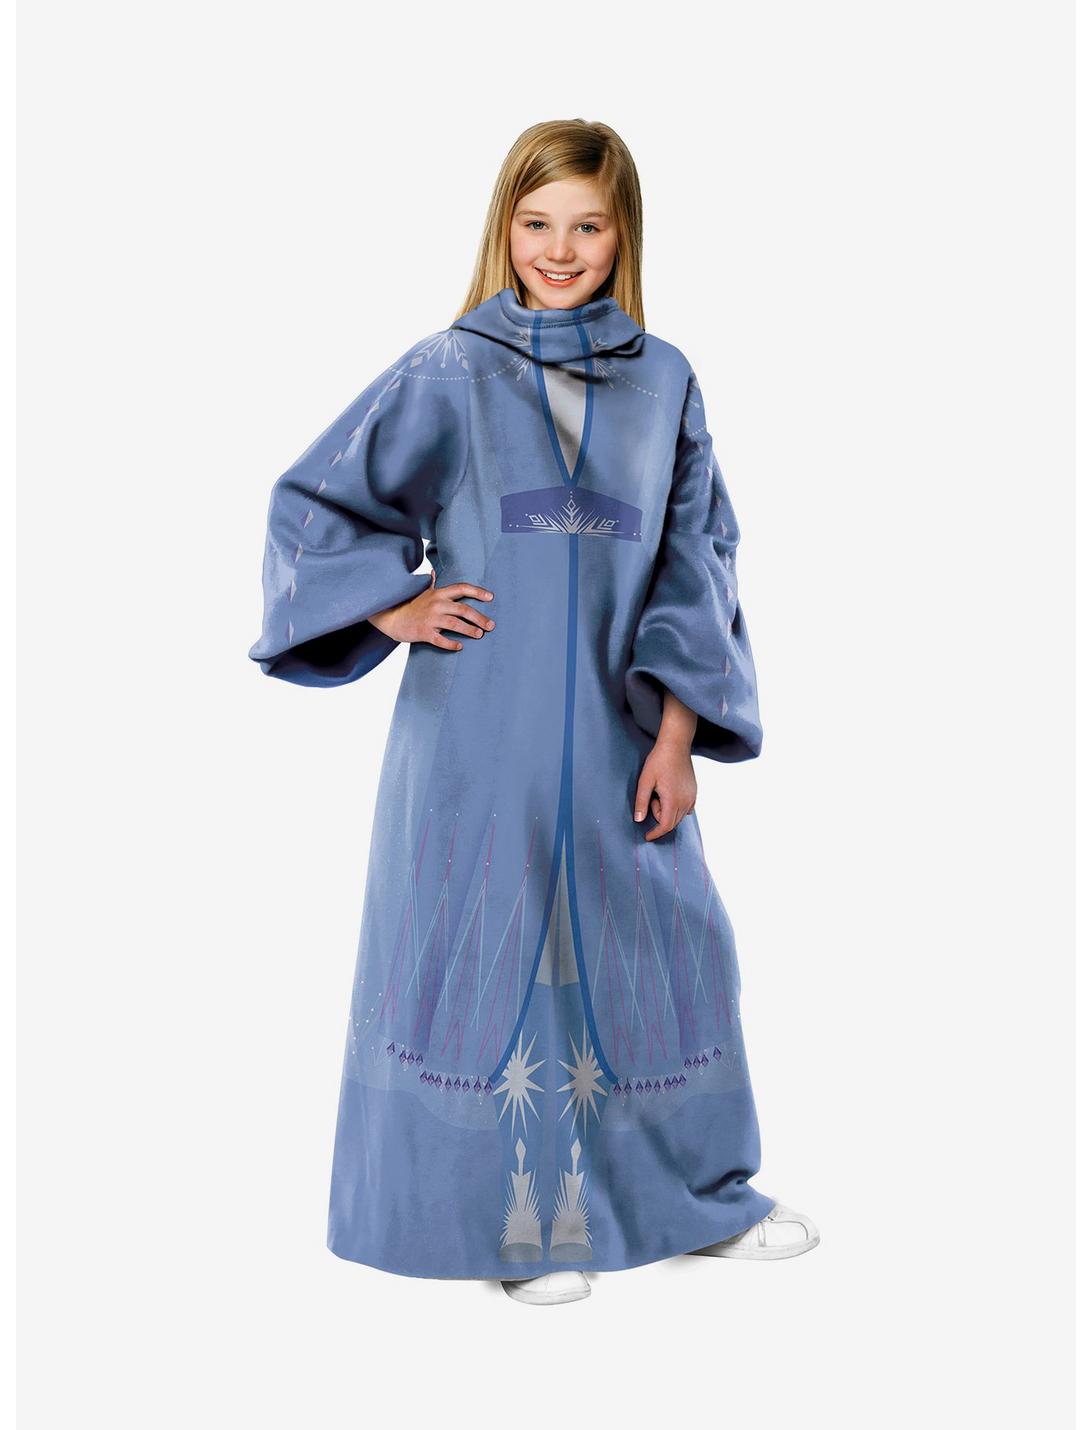 Disney Frozen 2 Anna Fall Gown Youth Comfy Panel Blanket, , hi-res